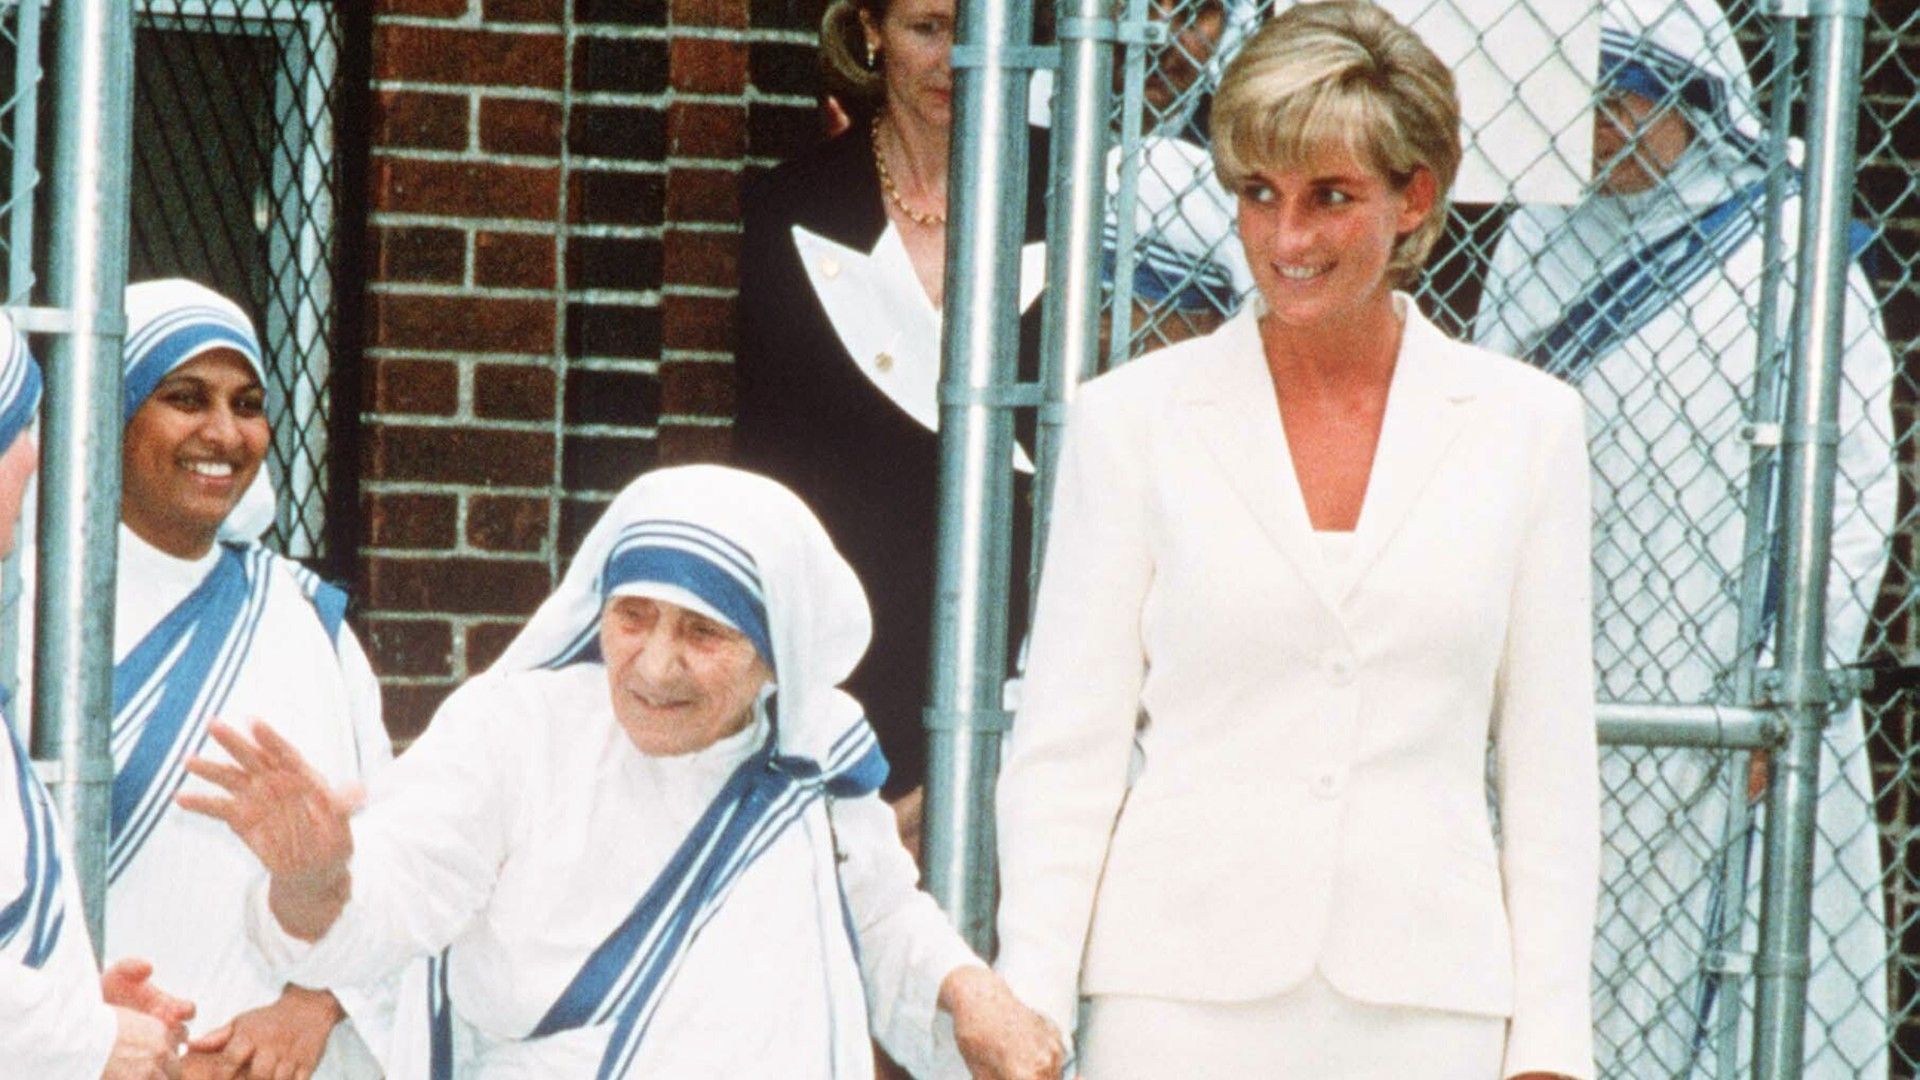 <p>                     The Princess of Wales was known to be friendly with plenty of famous figures, but you may not know that she also shared a close relationship with one of the most famous humanitarians in history, Mother Teresa.                   </p>                                      <p>                     The pair first met in 1992 in Rome, spending an afternoon together praying and chatting. They reunited (publicly) in New York in 1997, just a few months before Diana’s death. Commenting on Diana’s death in August 1997, Mother Teresa shared a public statement to reporters, saying, "Diana was extremely sympathetic to poor people – and very lively, and homely, too. All the sisters and I are praying for her and for all members of her family.                   </p>                                      <p>                     "[She was a] very good friend, in love with the poor, a very good wife, a very good mother. She was very concerned for the poor. She was very anxious to do something for them. That is why she was close to me."                   </p>                                      <p>                     It’s also claimed that Diana was buried with a set of rosary beads in her hands, given to her from Mother Teresa.                   </p>